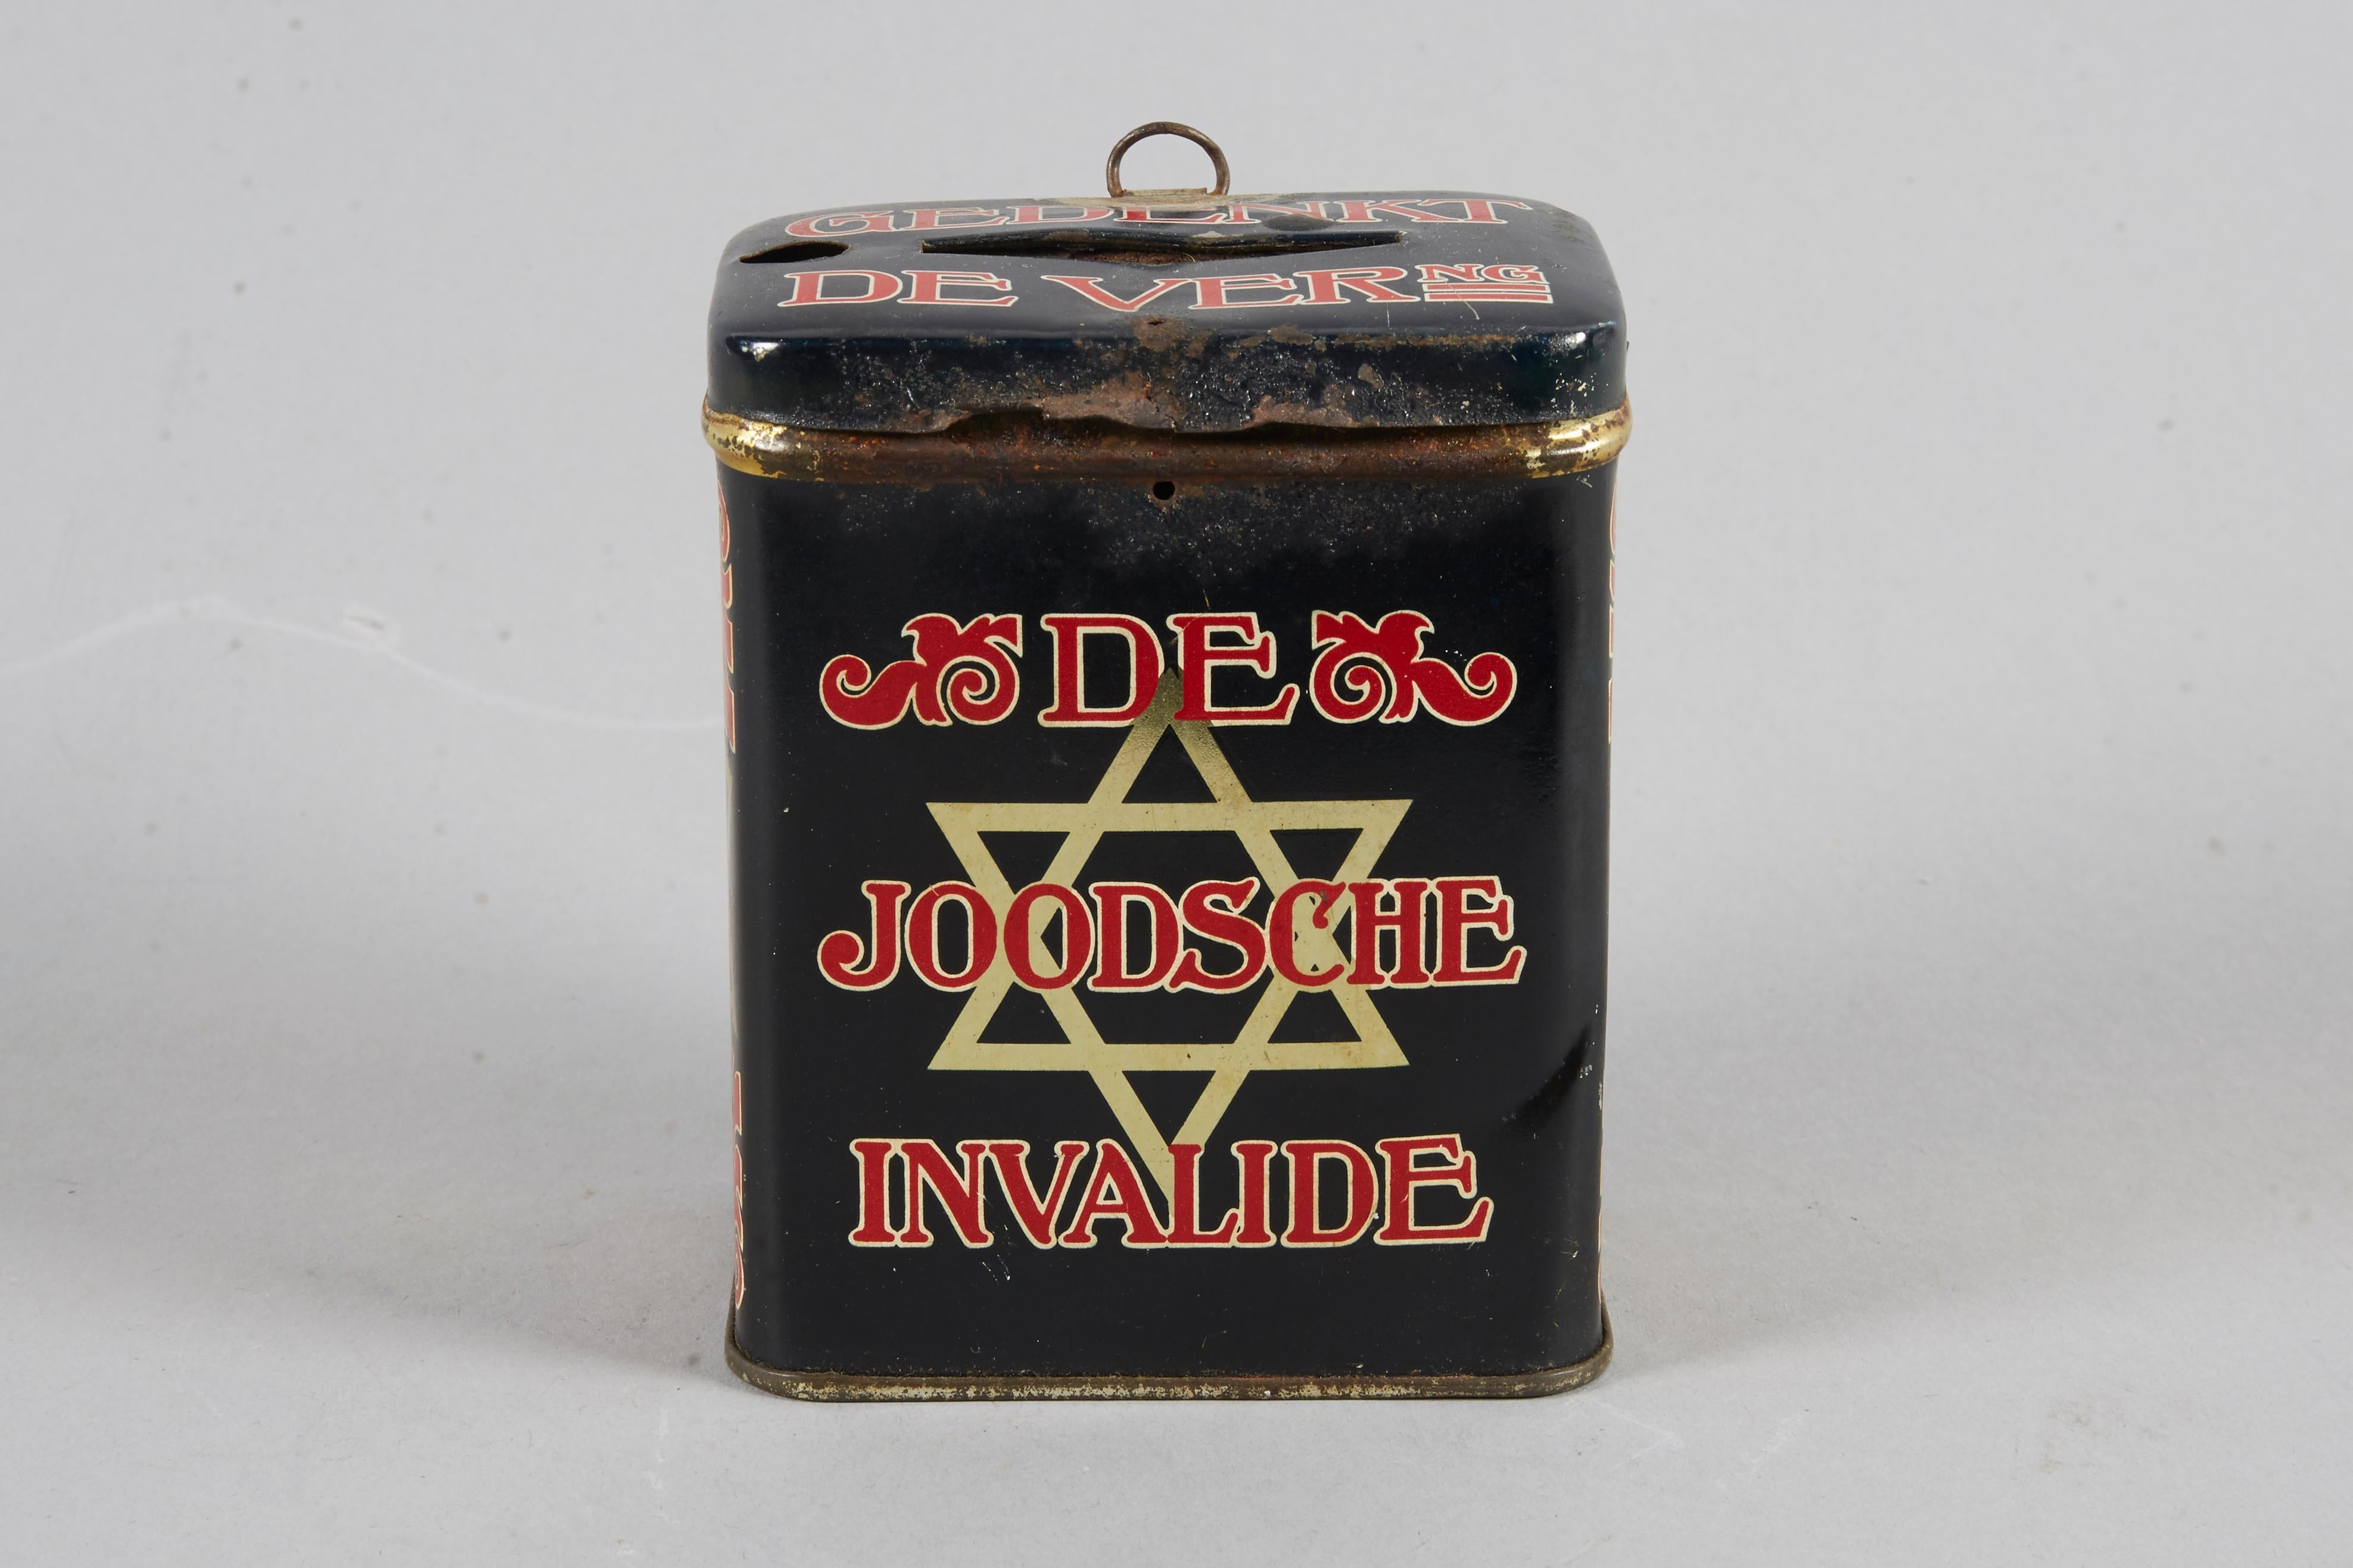 Black, red, and gold painted tin charity box, The Netherlands, circa 1915. 
Used for collecting funds for the Jewish hospital.
Decorated with Stars of David and inscribed on the front in Dutch: ‘De Joodsche Invalide’ (The Jewish Disabled).

Tzedakah